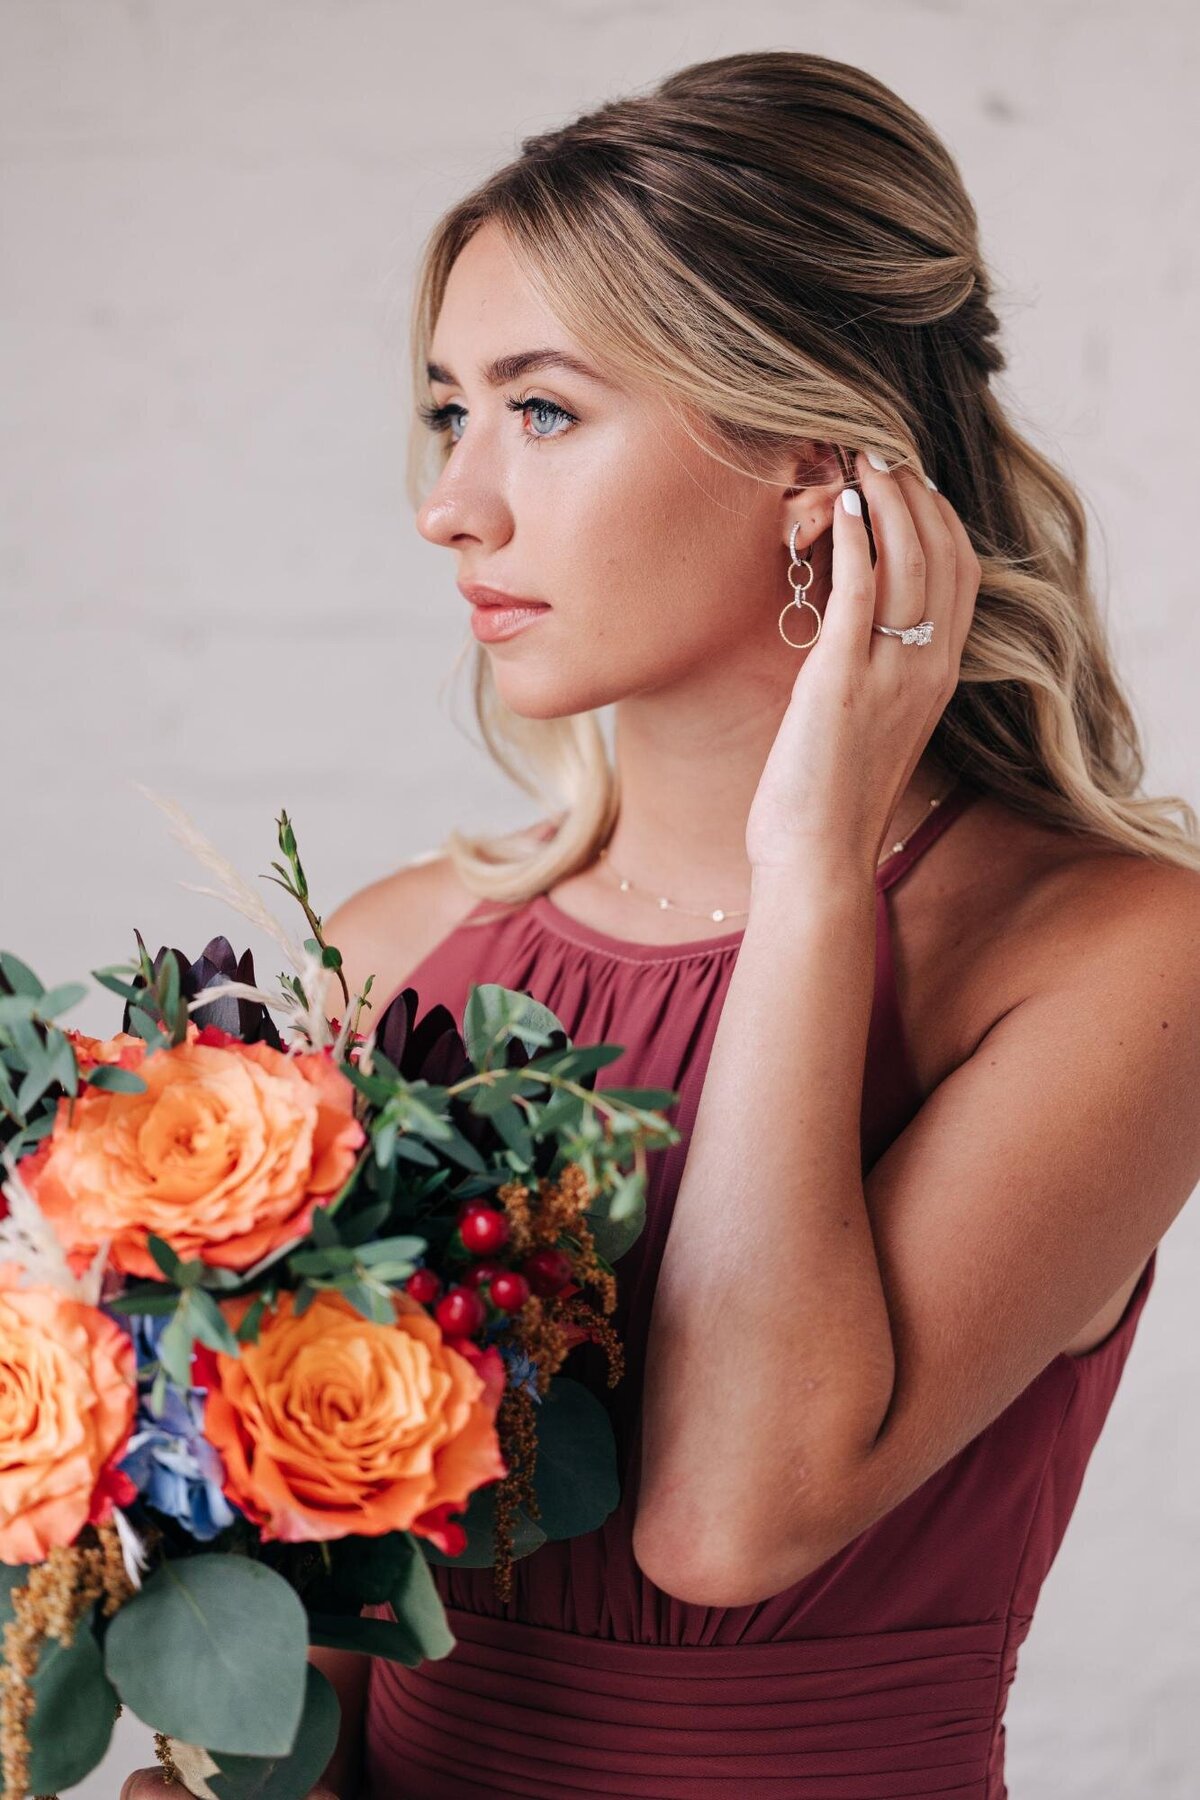 Woman in a burgundy dress holding a bouquet and adjusting her earring.